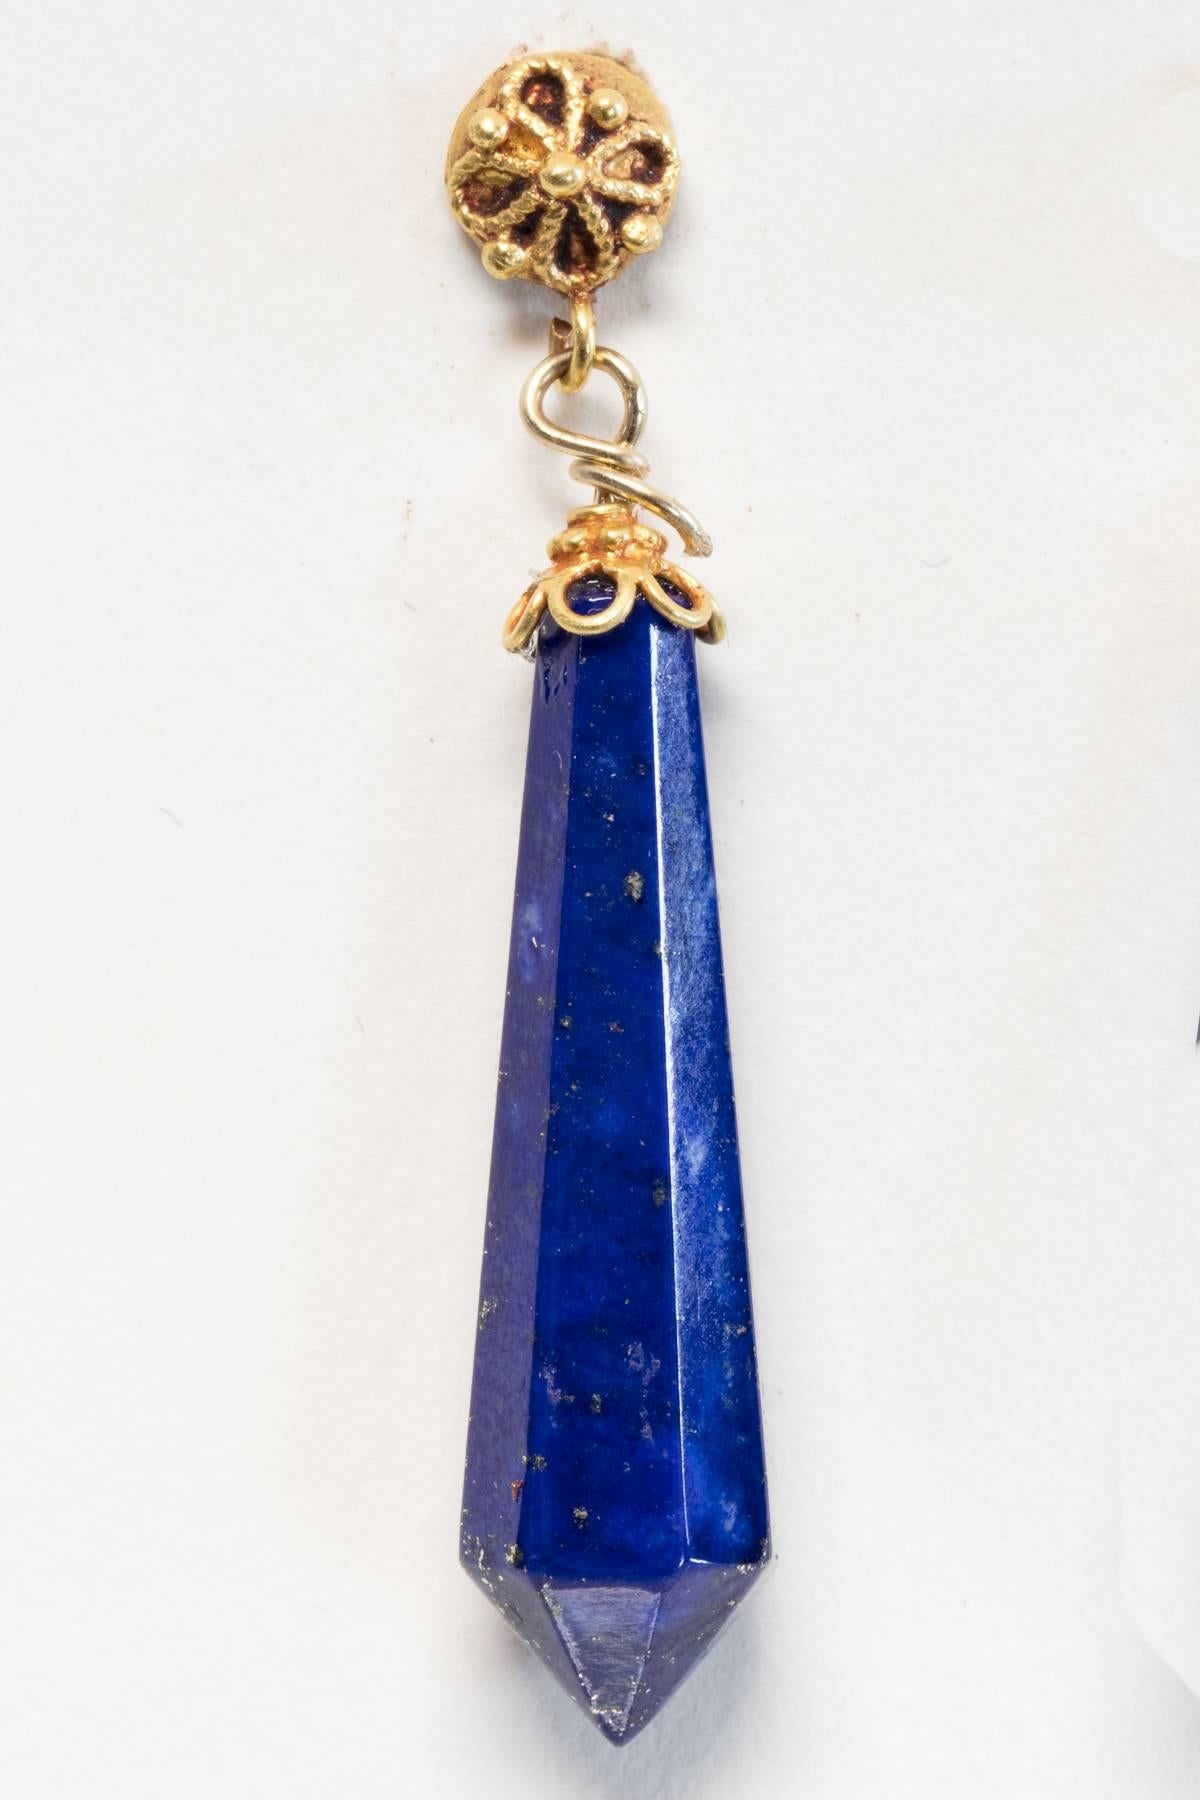 Beveled Lapis Lazuli tapered spears, all natural, and of exceptional color, with 22K gold end caps and gold posts with fine granulation work.  For pierced ears.  Designed by Deborah Lockhart.